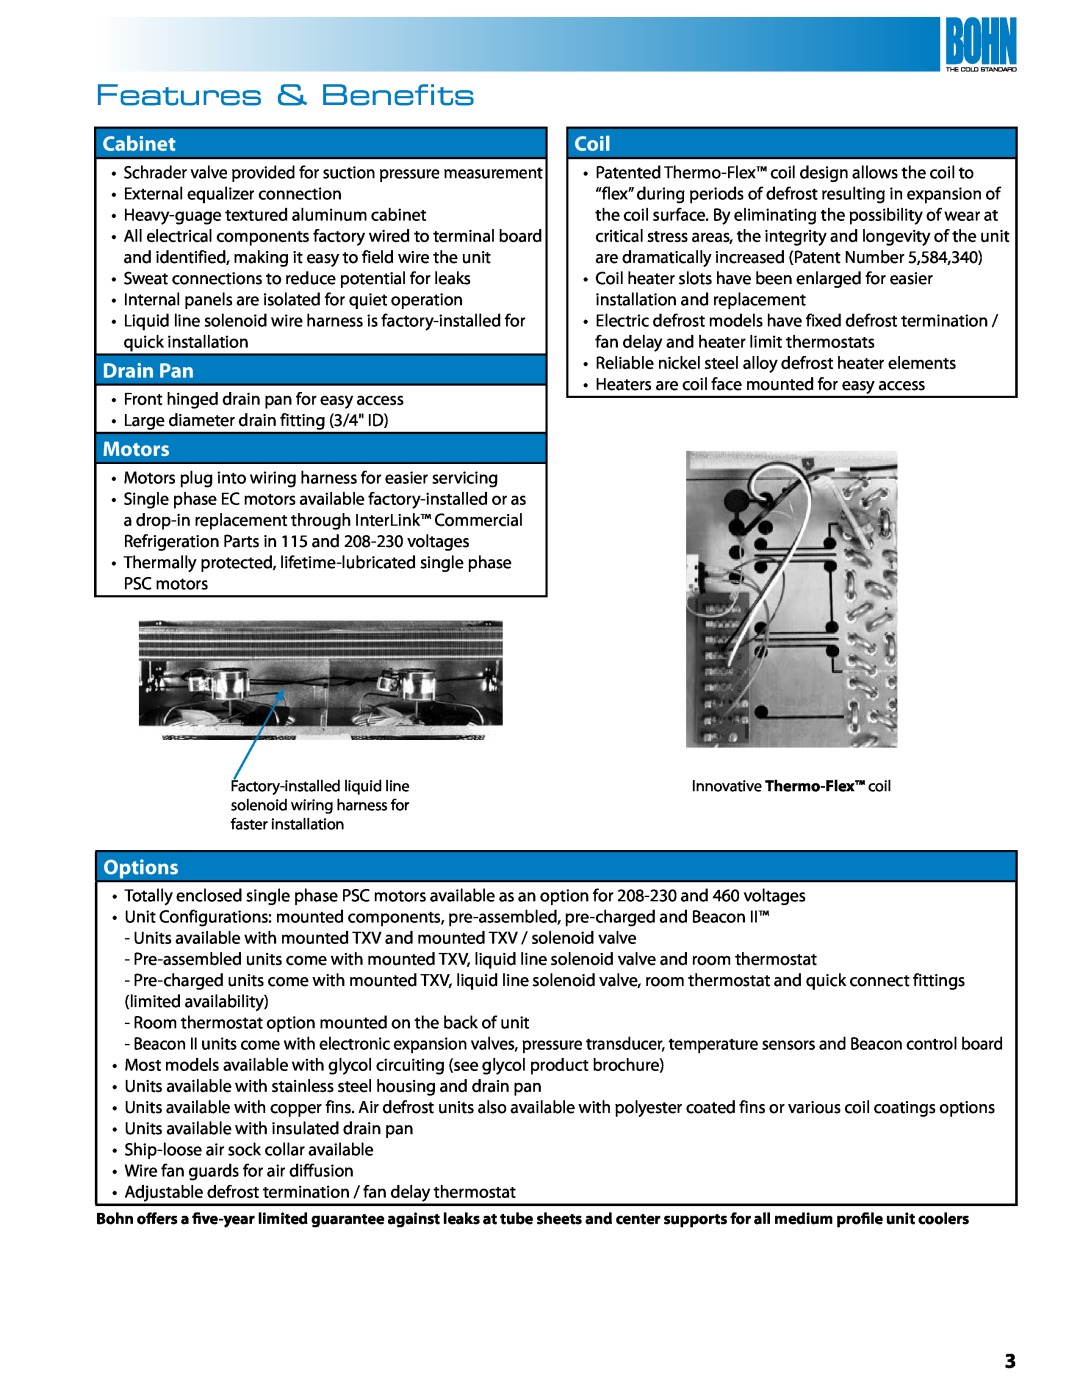 Heatcraft Refrigeration Products BME, BMA, BMG, BMF, BML manual Features & Benefits, Cabinet, Drain Pan, Motors, Coil, Options 